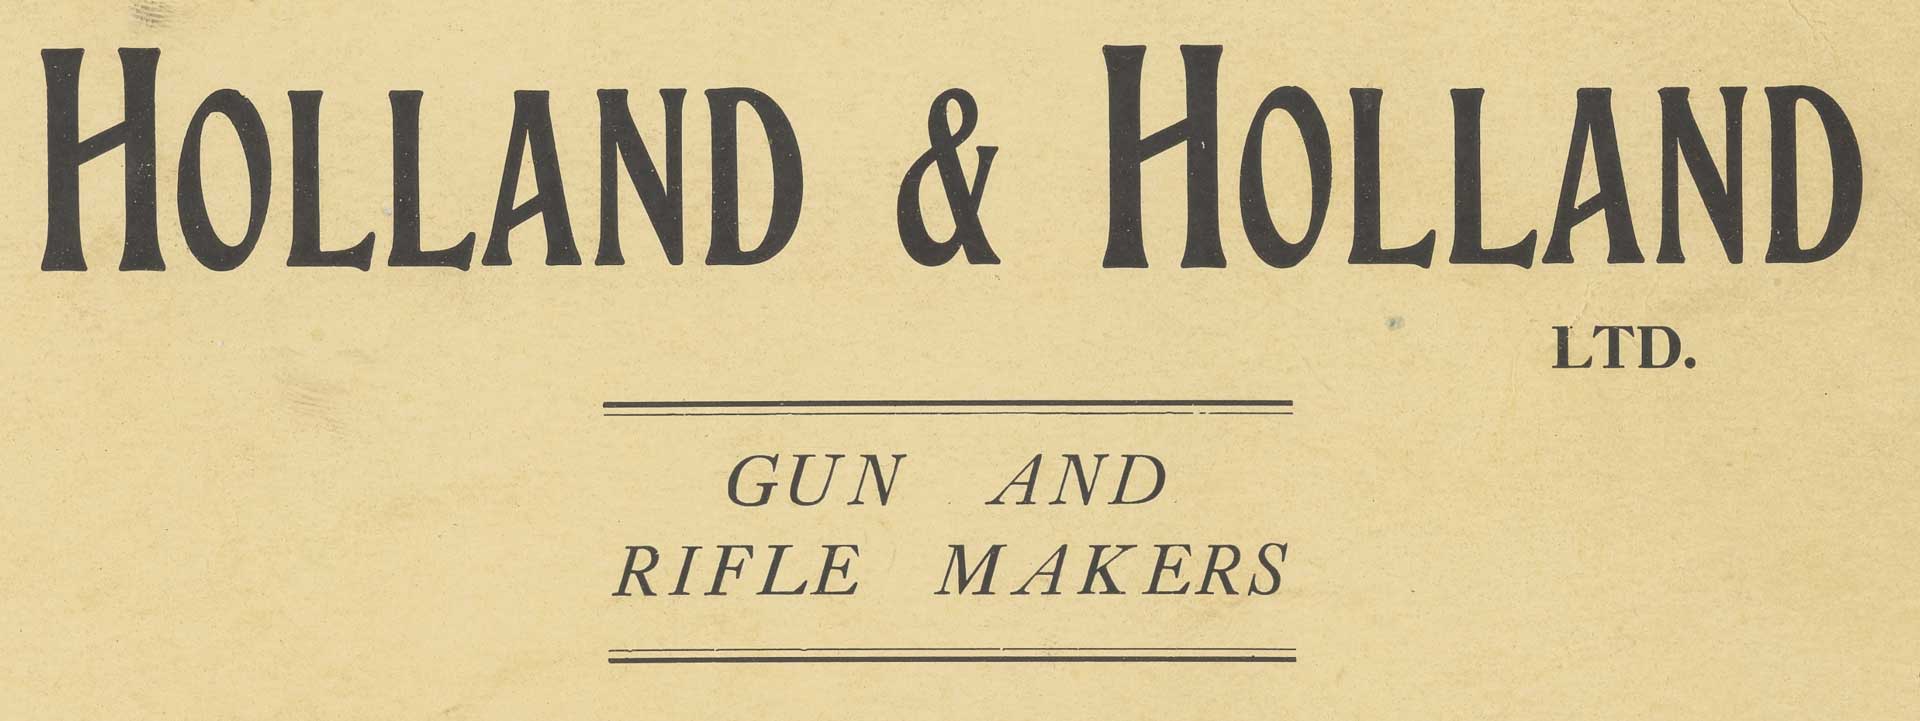 holland and holland logo name text gun and rifle makers